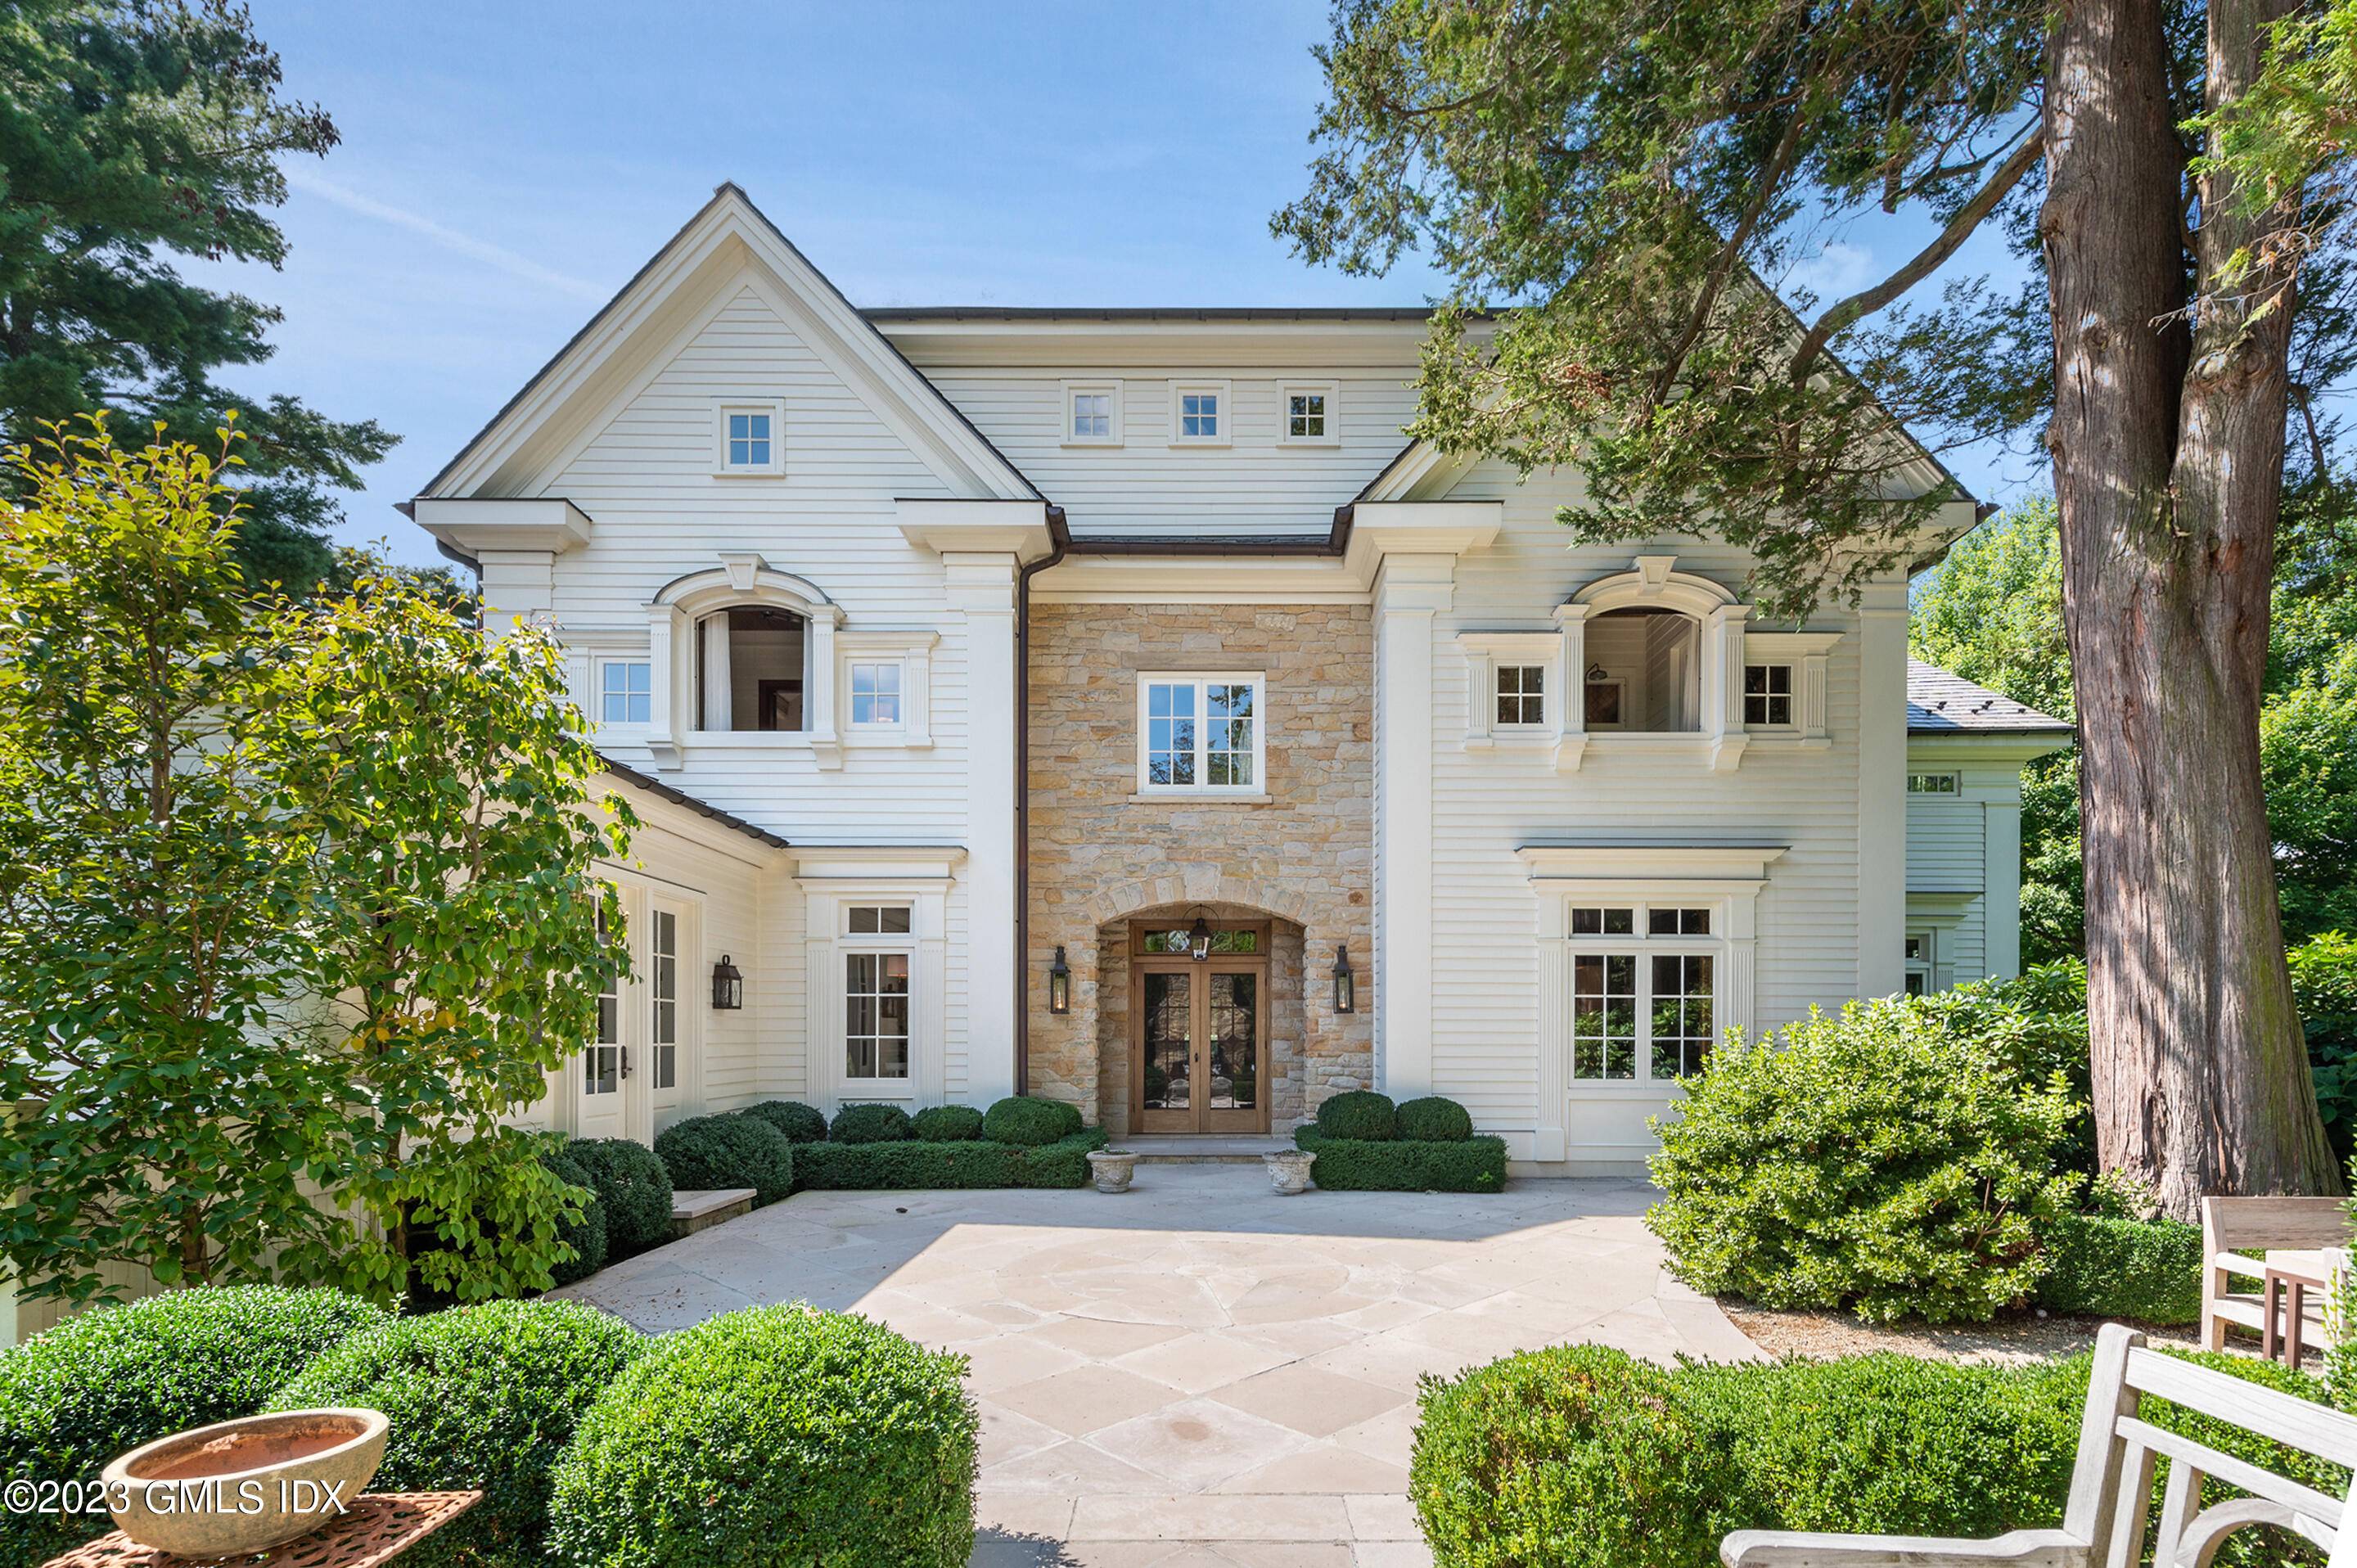 Timeless stone and clapboard center hall Colonial, hand crafted by legendary Hobbs Custom Builders, exuding quality with its timeless details and beauty.